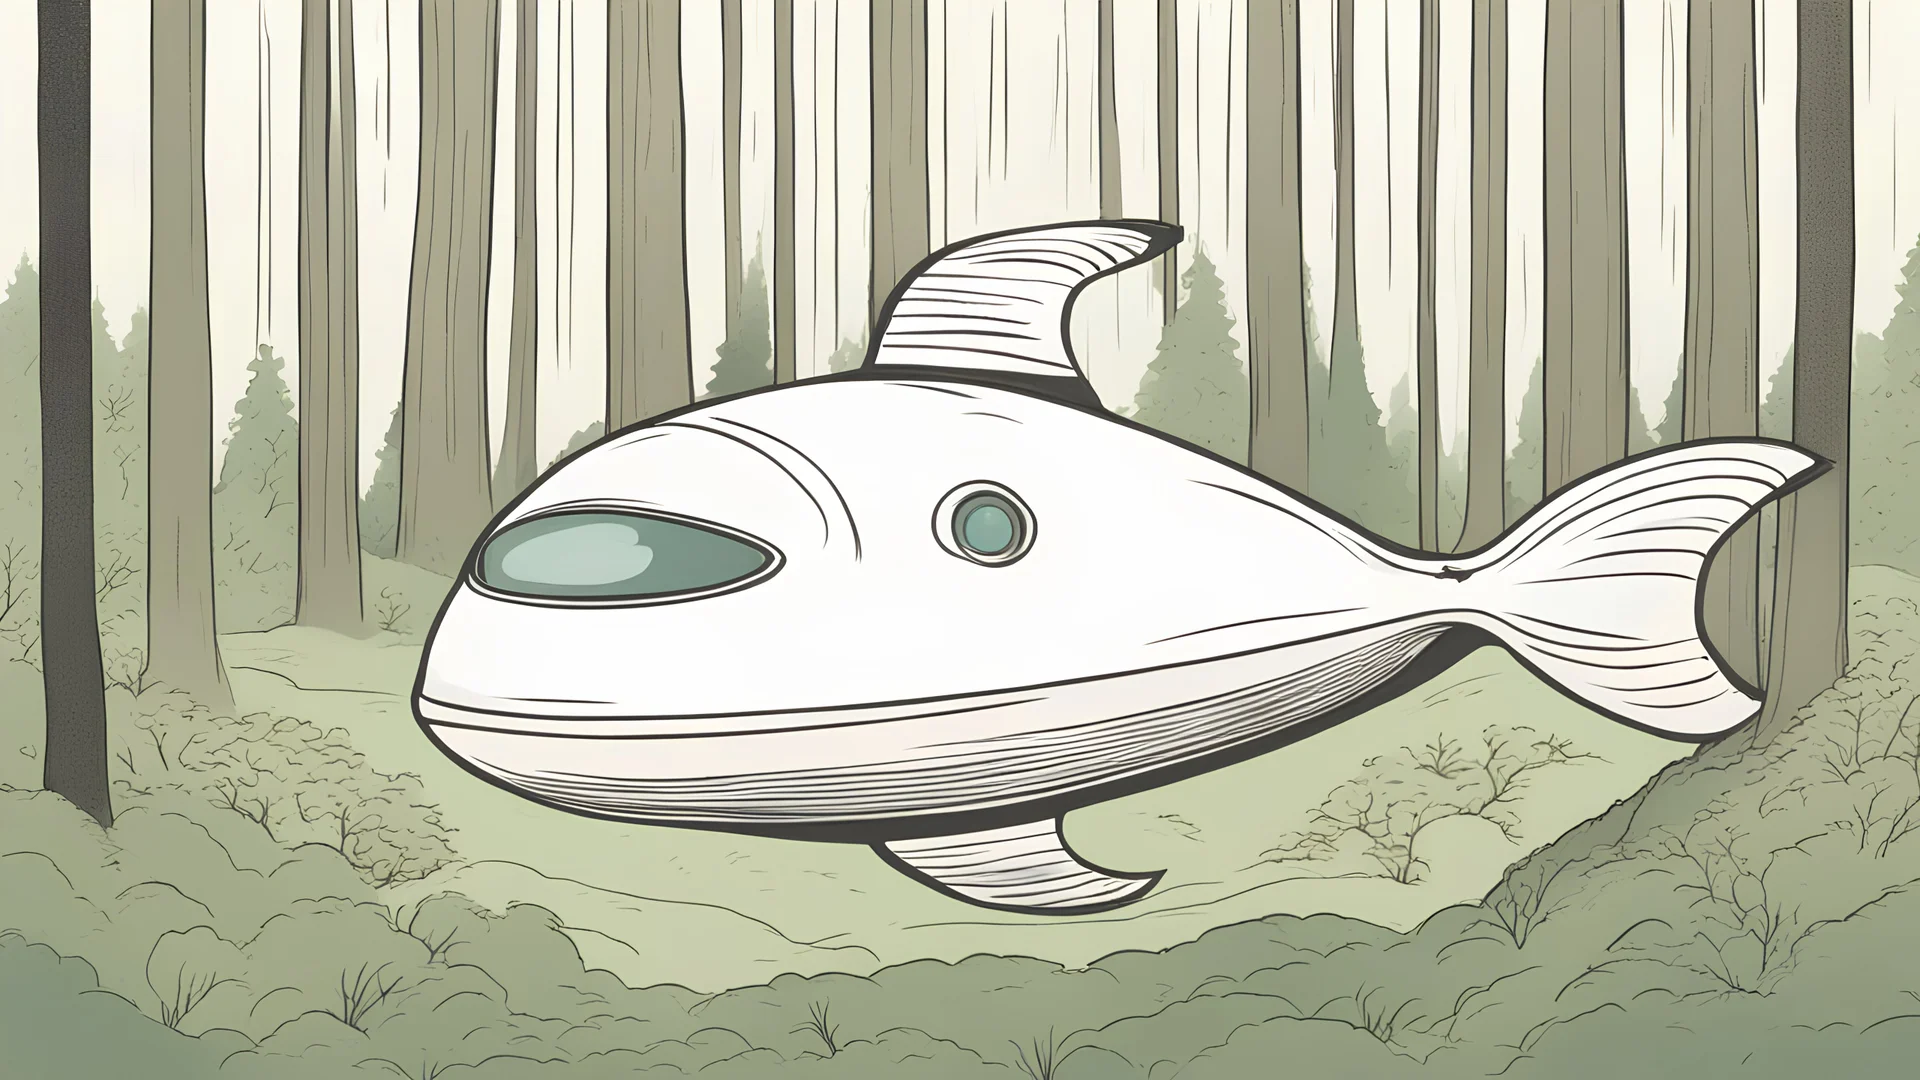 spaceship shaped like a flatfish, in a forest clearing